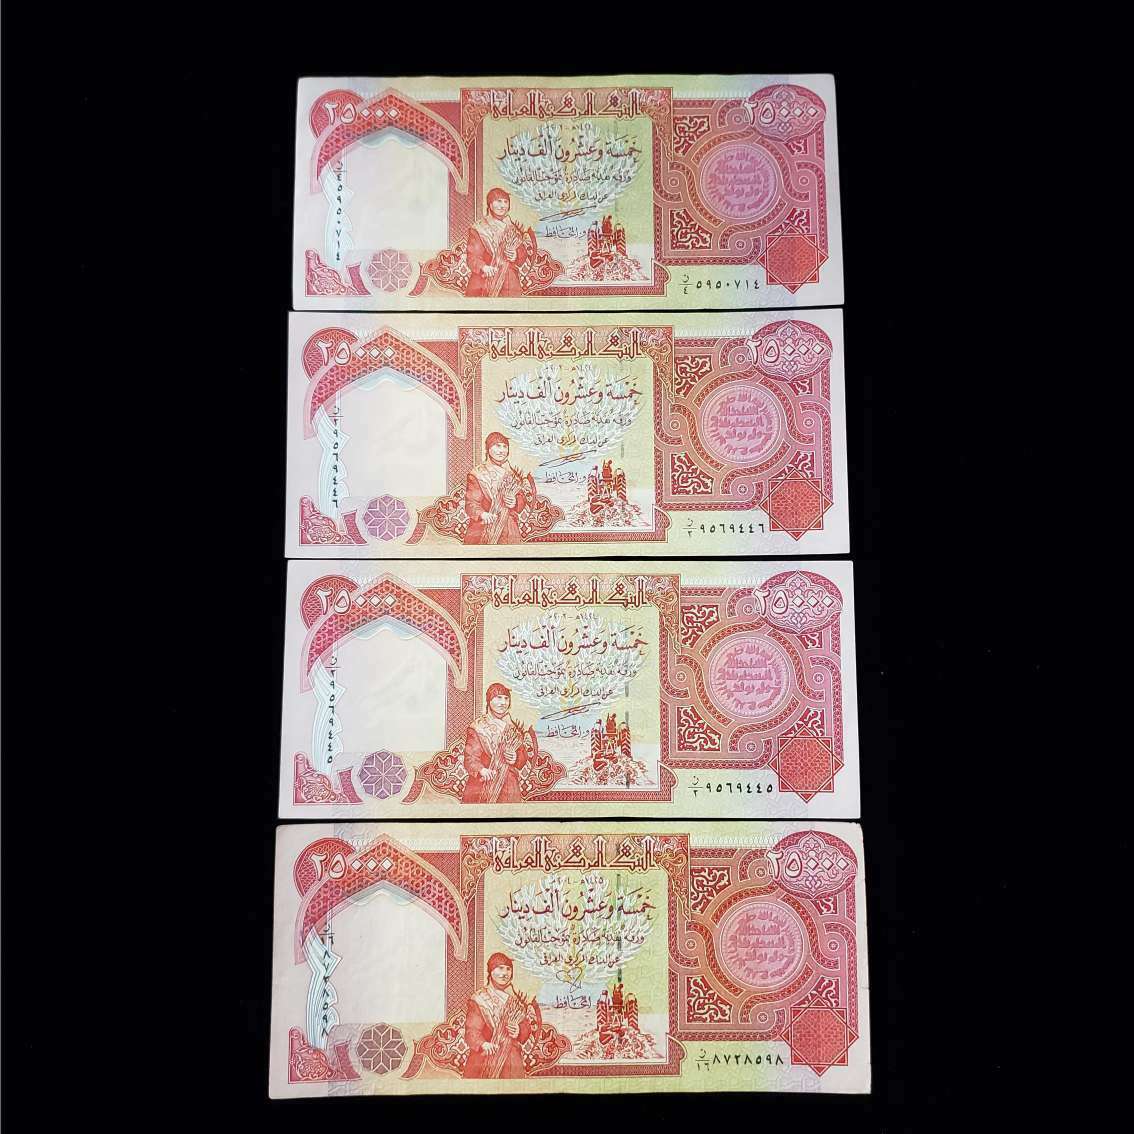 Sale !! 100,000 Iraqi Dinar (4) 25,000 Notes Circulated Authentic!! Iqd! Hv30789